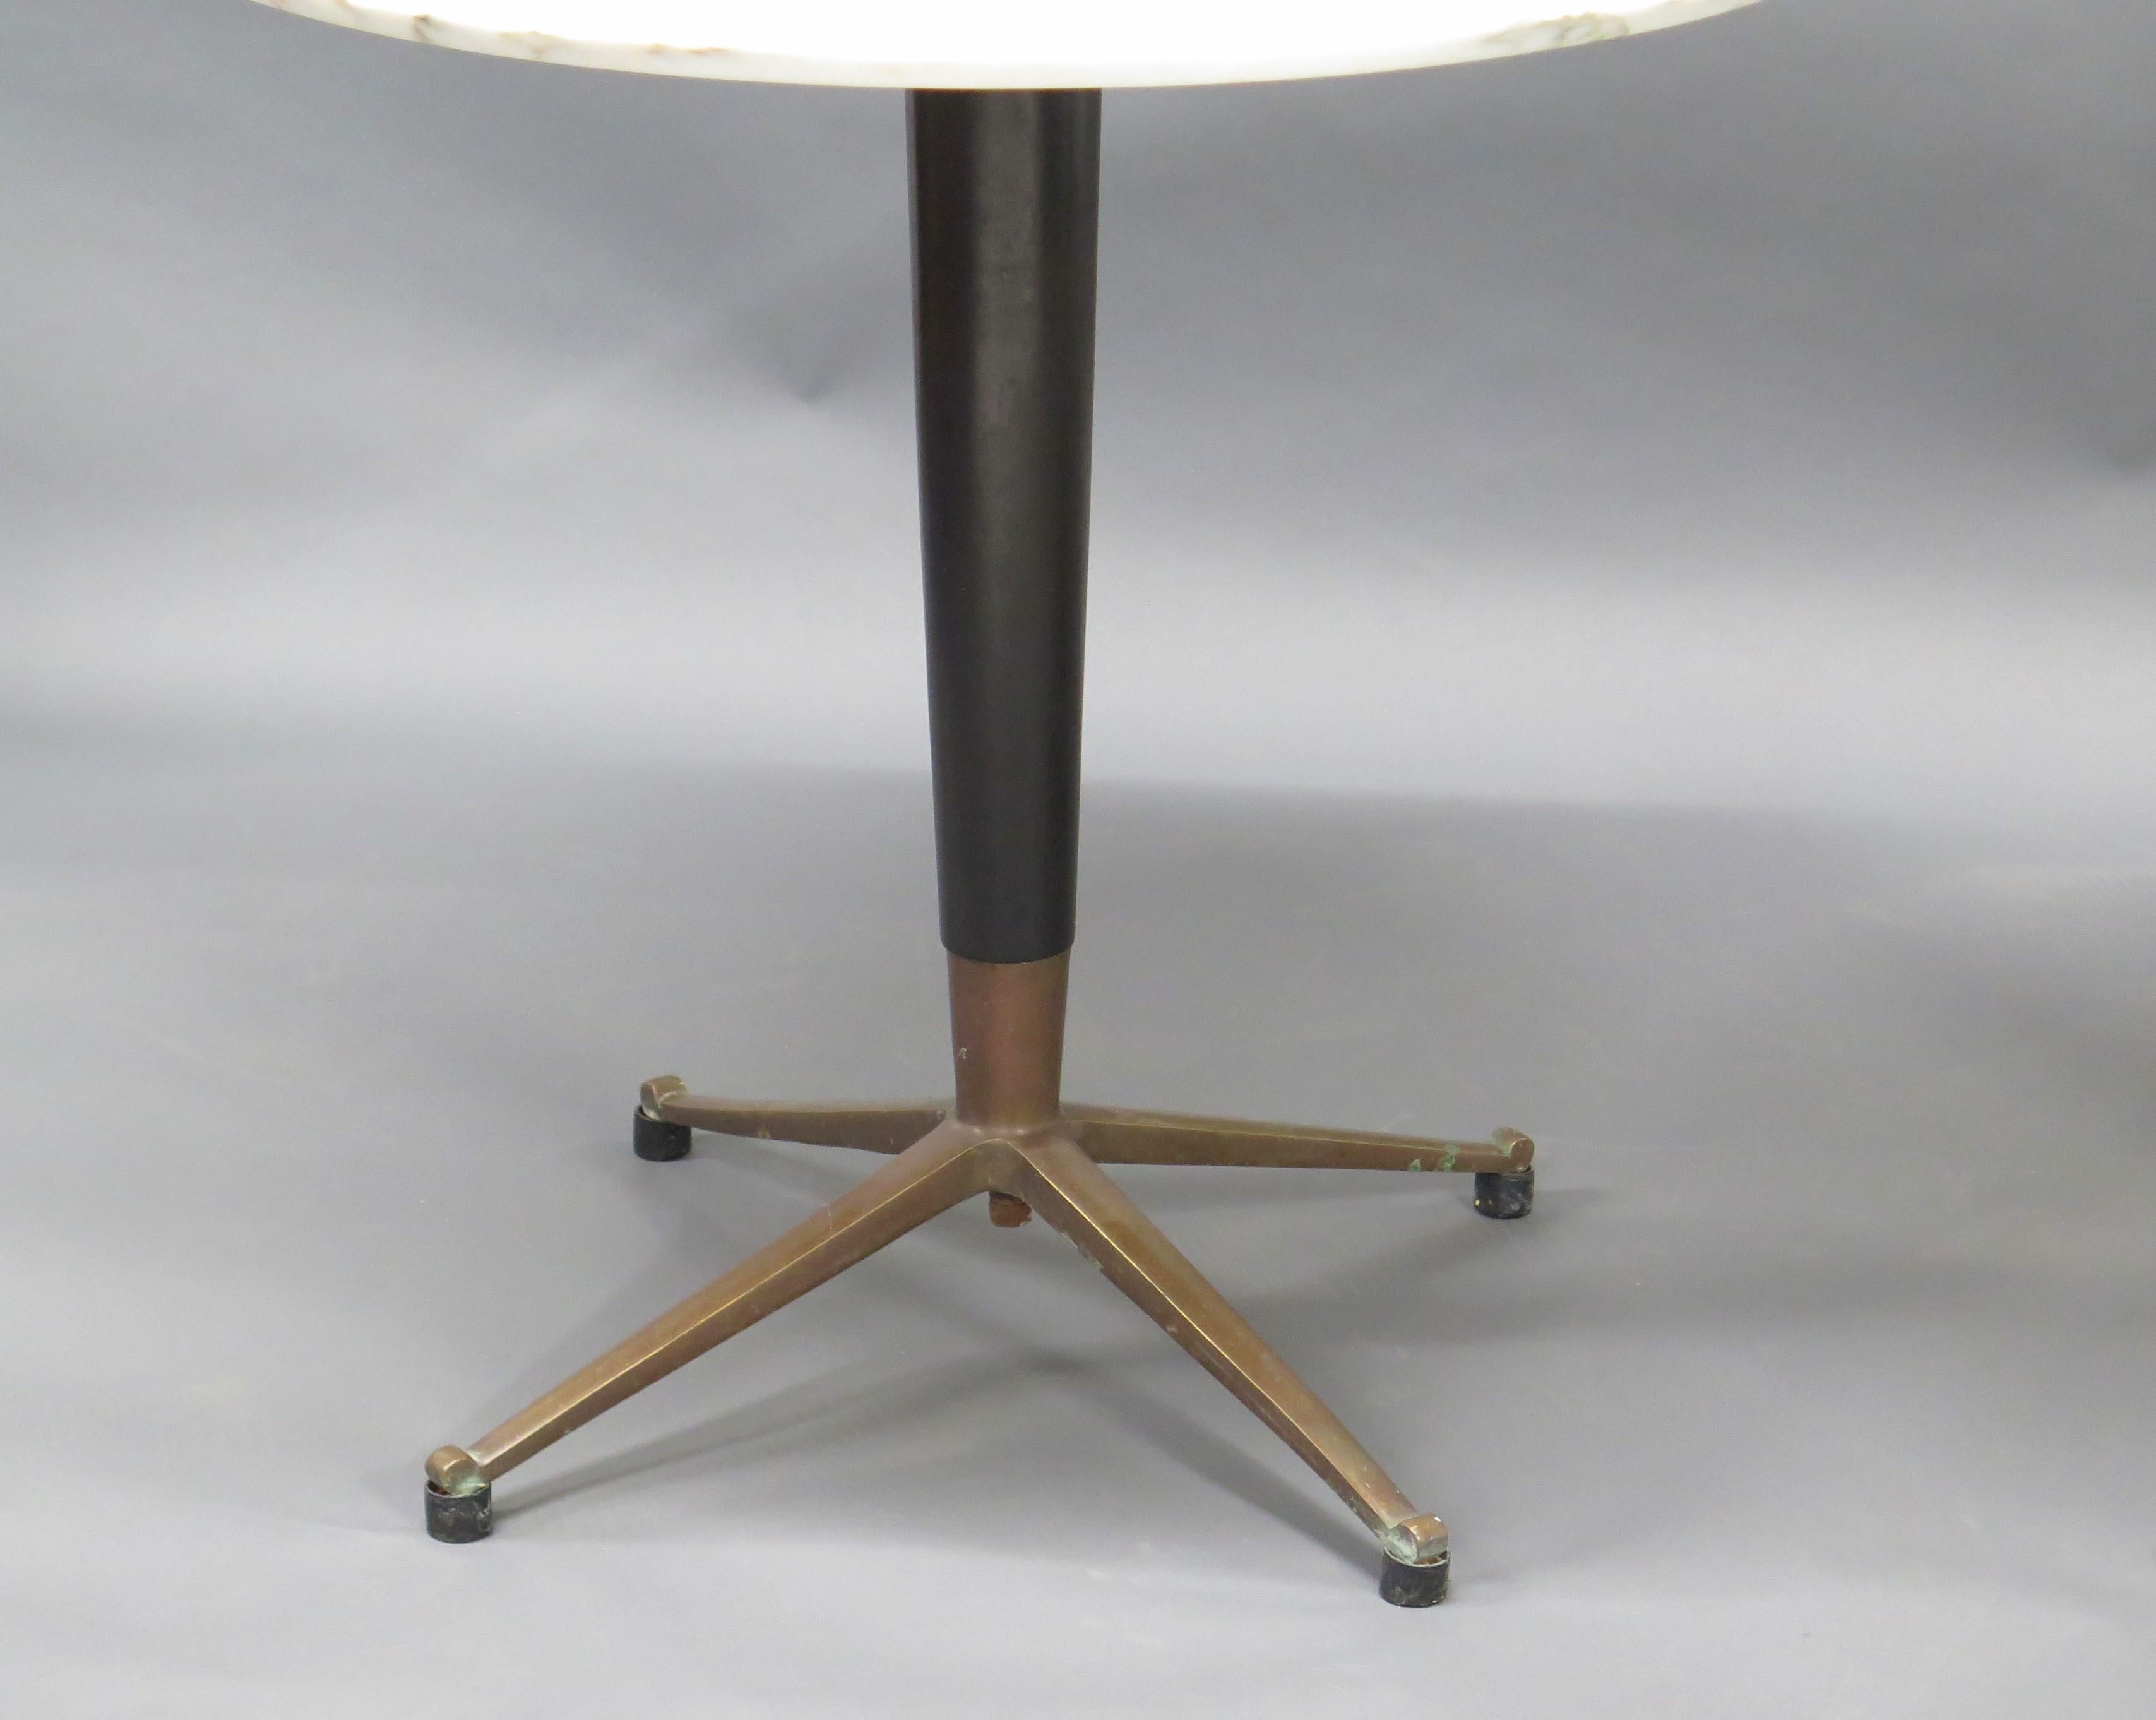 Mid-Century modern Melchiorre Bega side table with a carrera marble top, laquered wood pedestal and a three spoke base in brass. Italy. 20th Century.

Melchiorre Bega (1898-1976) was trained as an architect and later became a designer. He is known